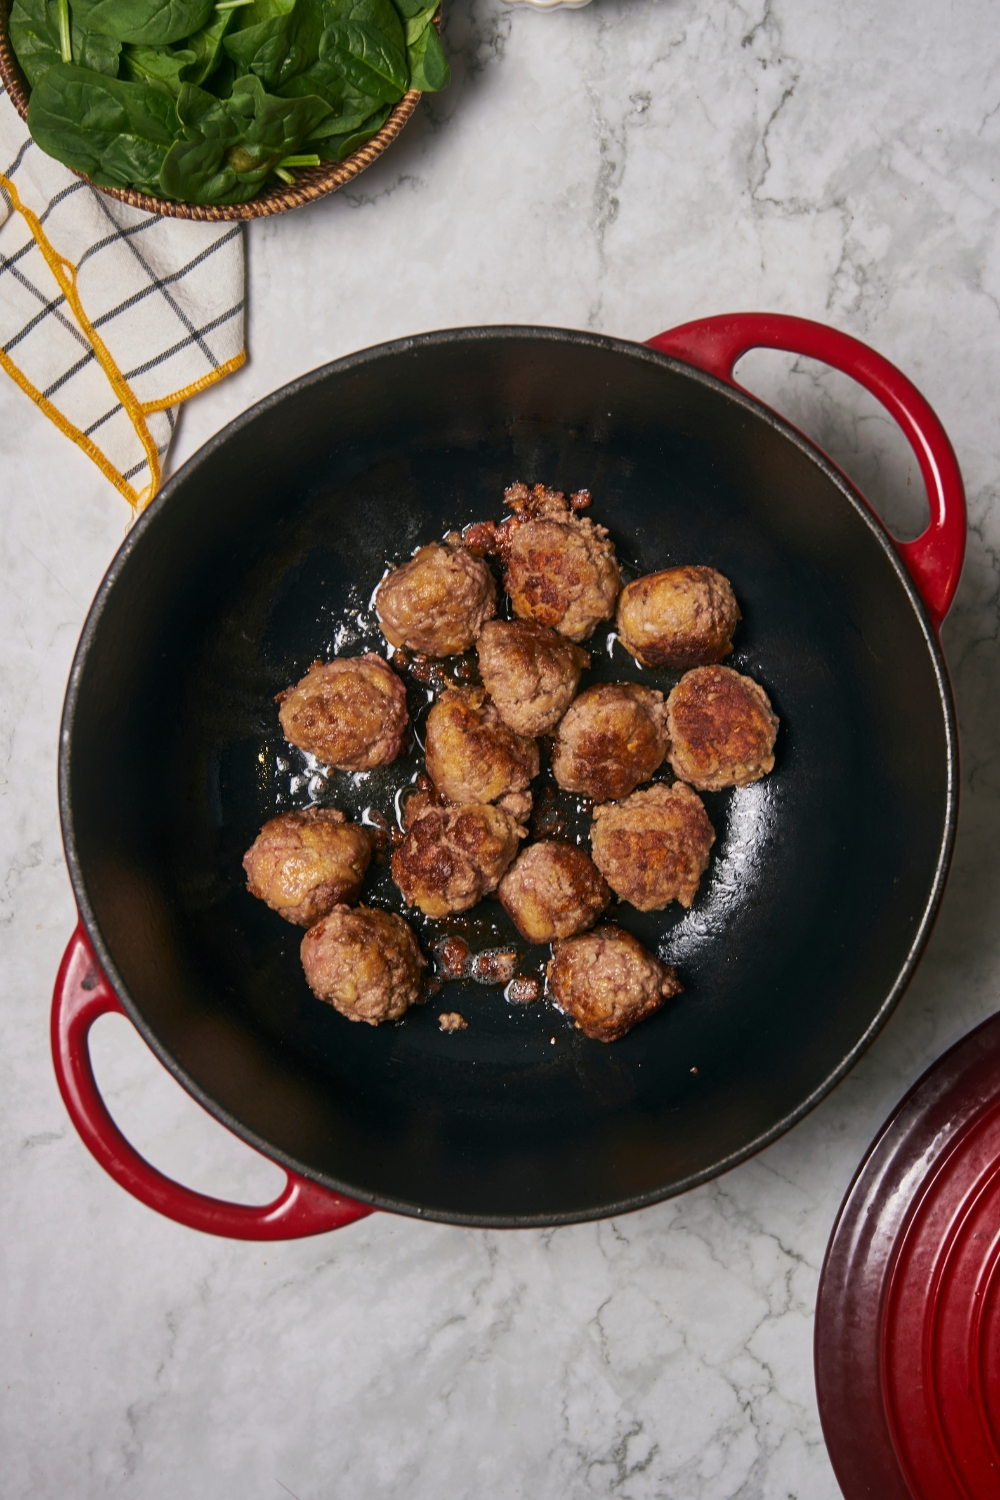 Red Dutch oven filled with browning meatballs.